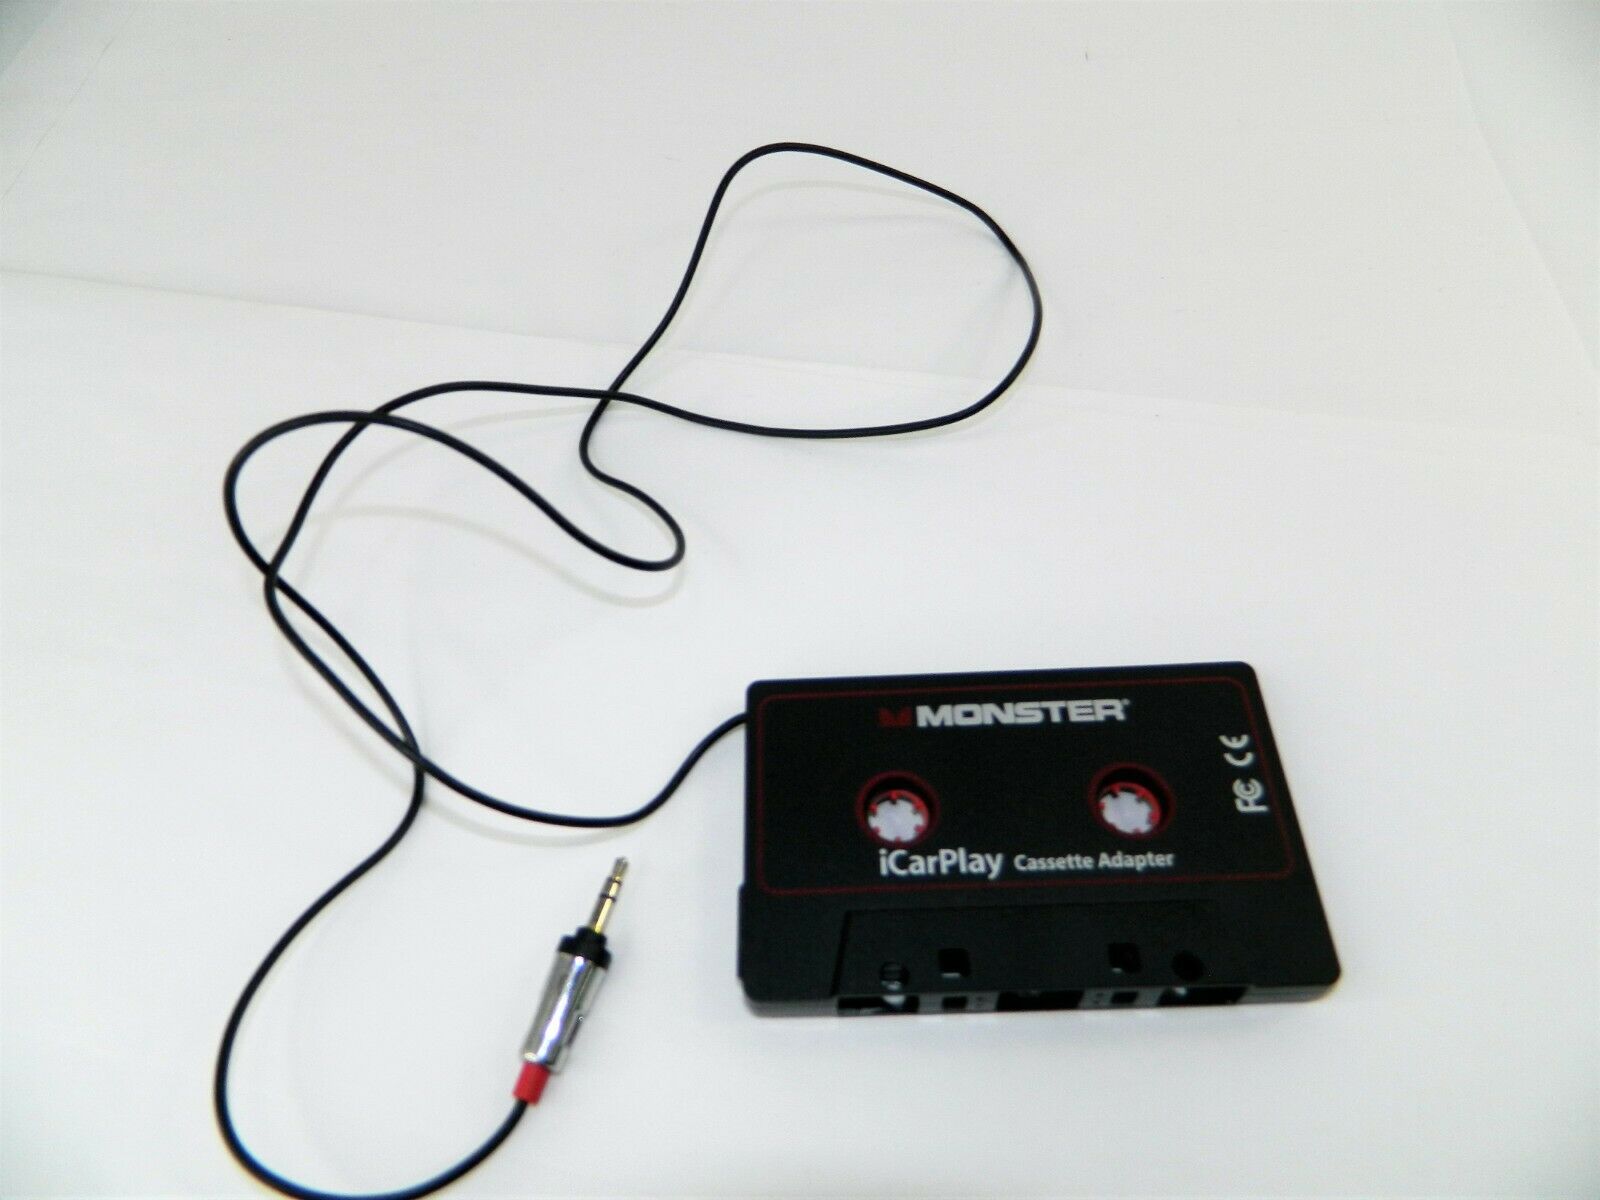 Monster Aux Cord Cassette Adapter 800 - Icarplay For Car Tape Deck, Auxiliary...